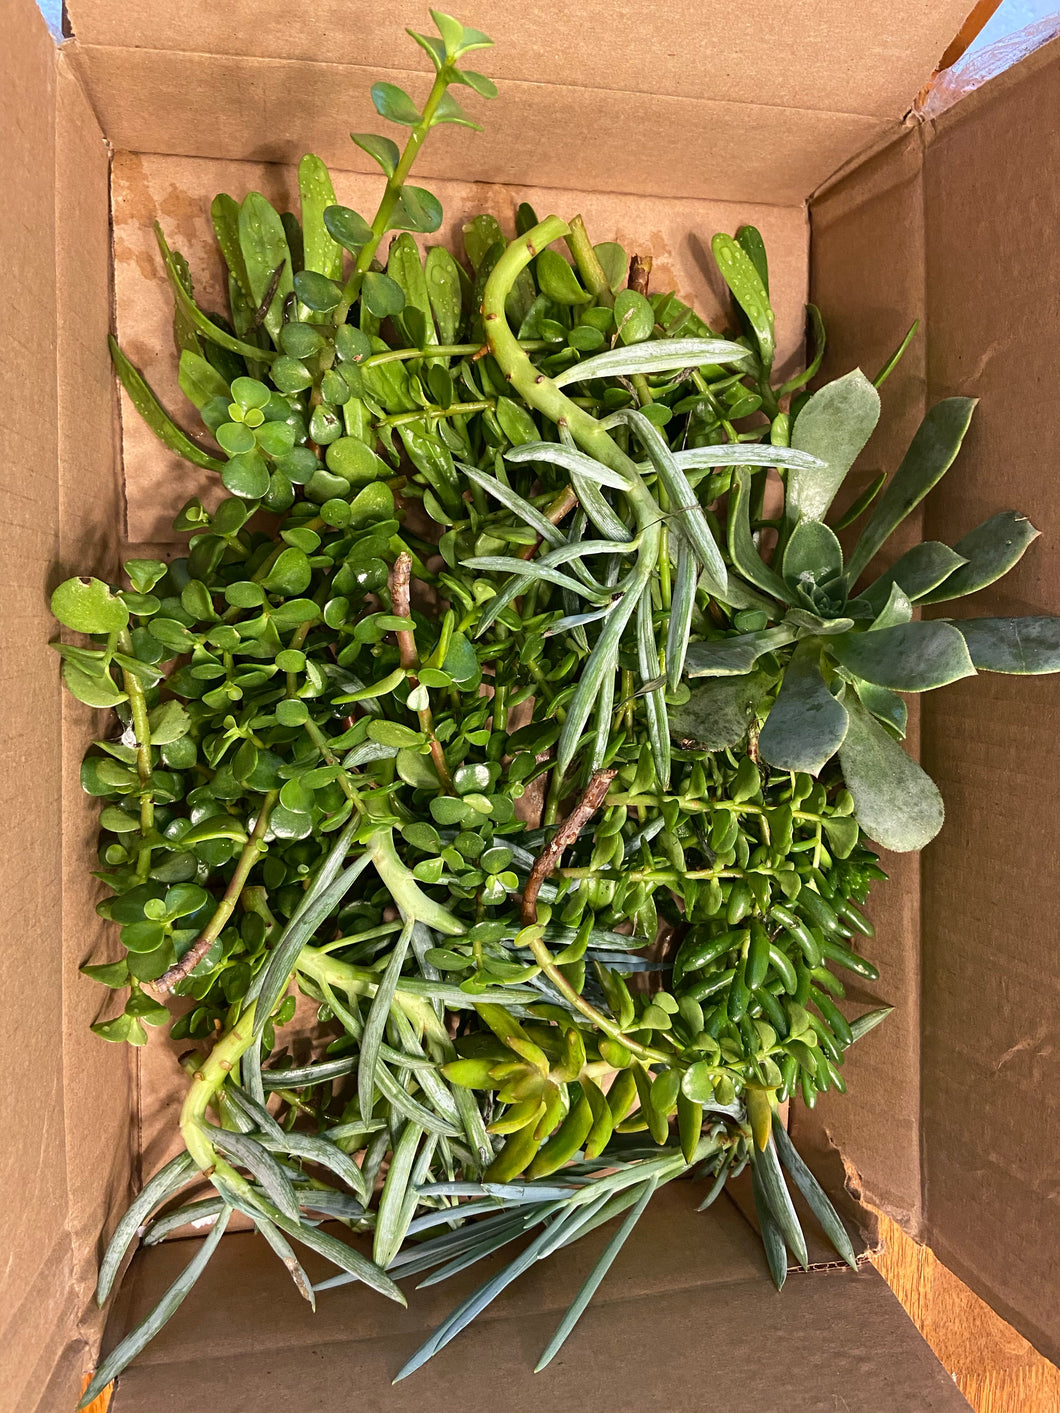 Succulent clippings